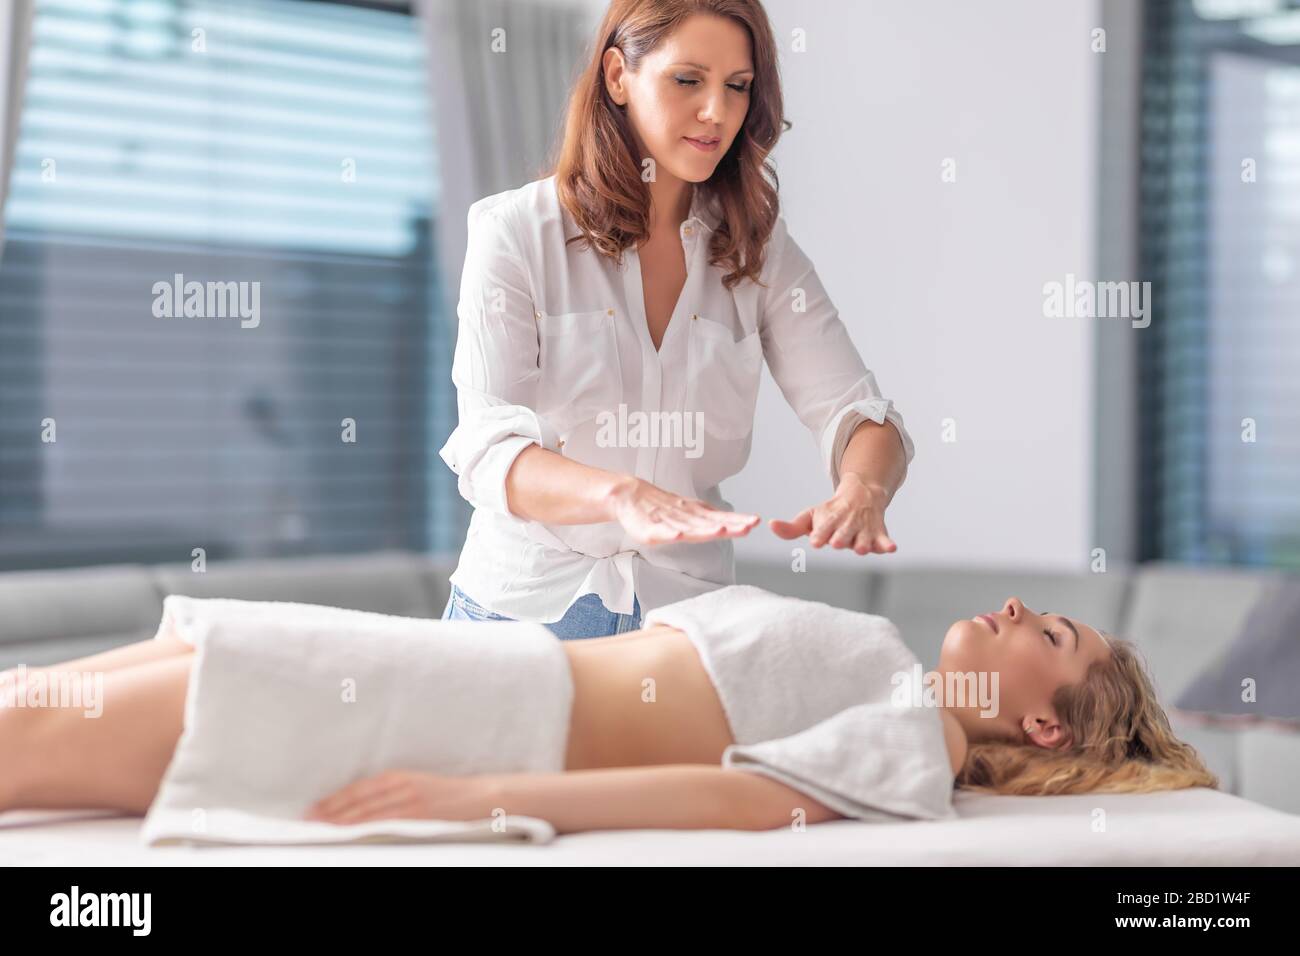 Focused reiki healer doing therapy session with a young beautiful woman in a health spa center. Stock Photo